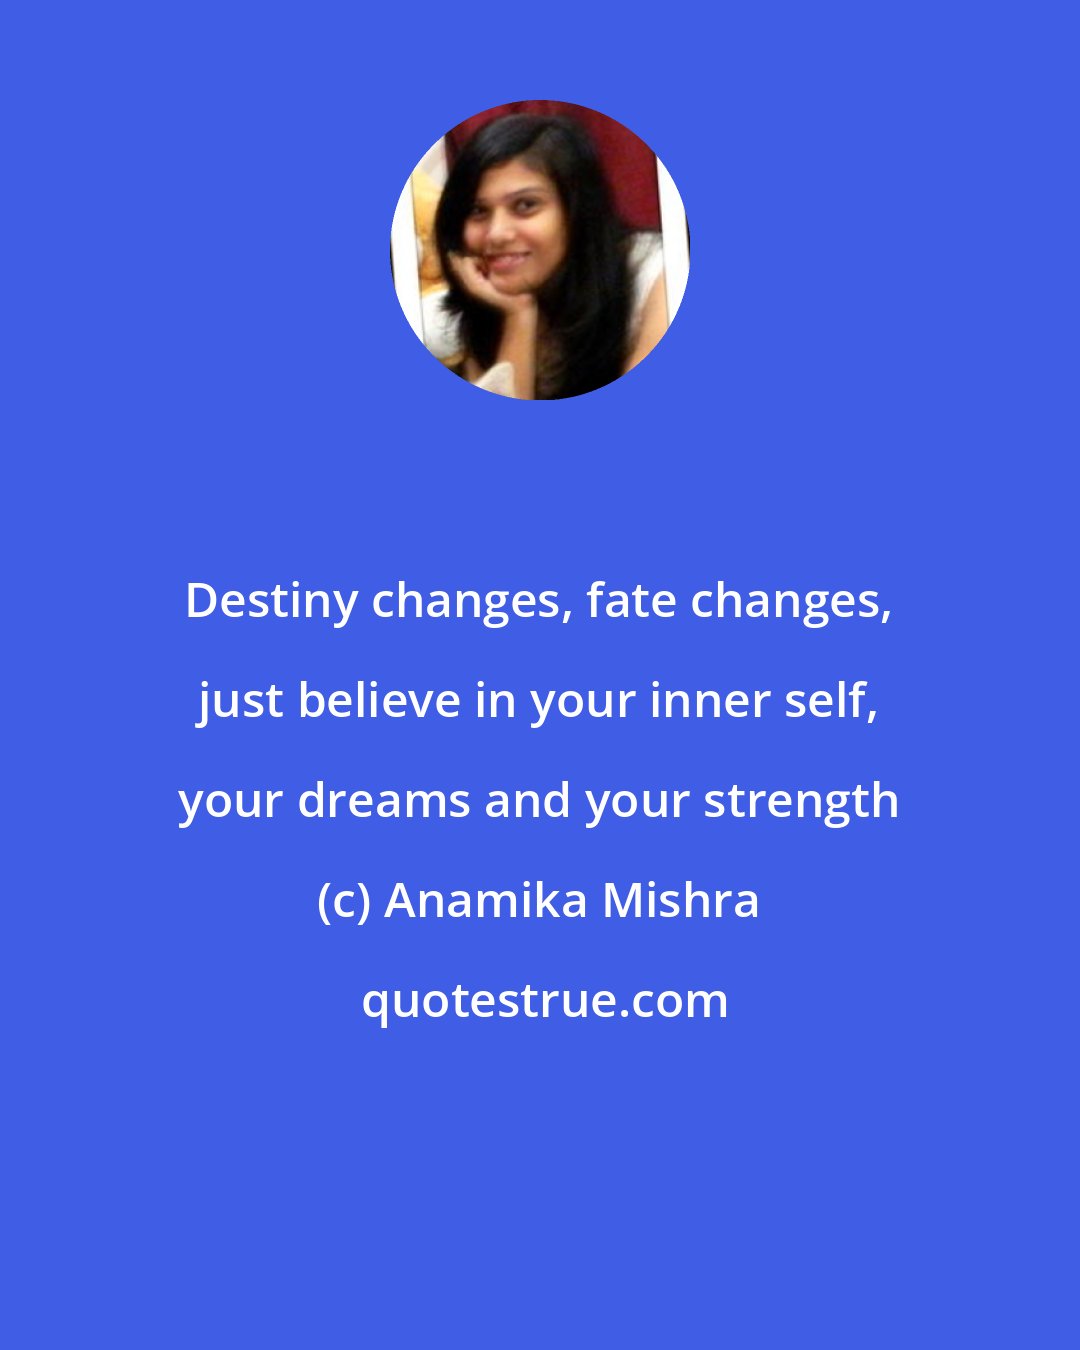 Anamika Mishra: Destiny changes, fate changes, just believe in your inner self, your dreams and your strength